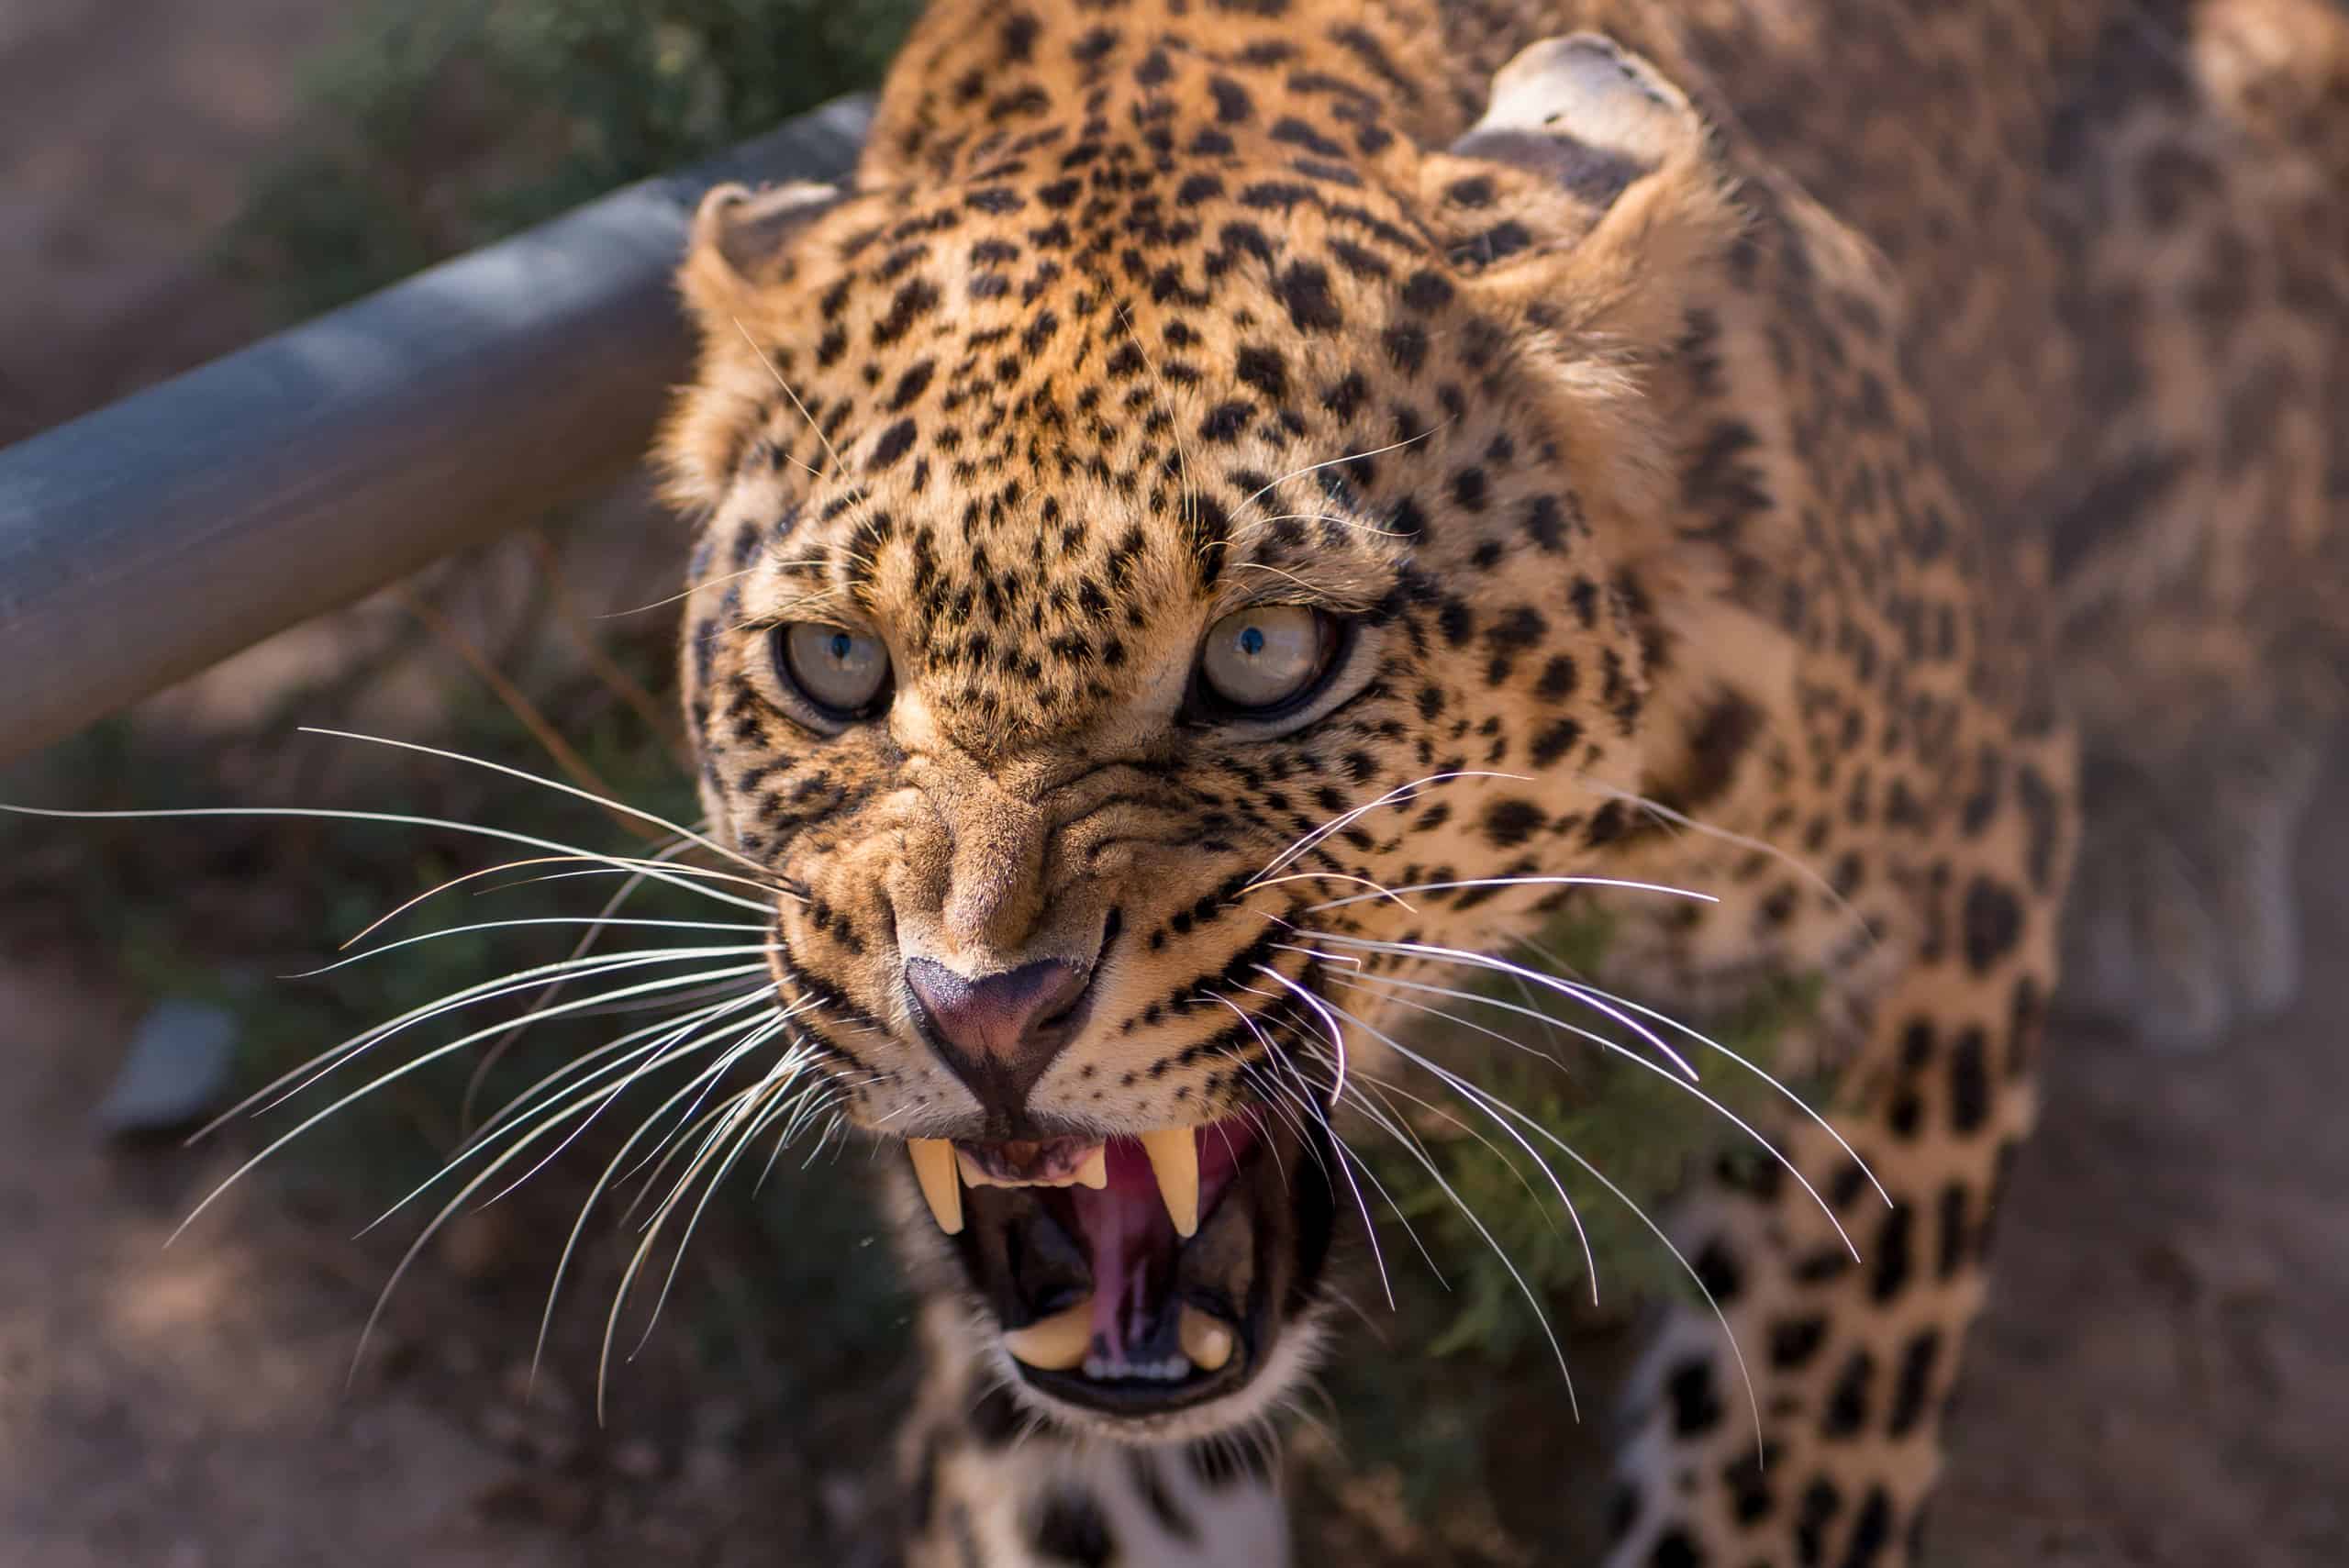 Leopard attacked